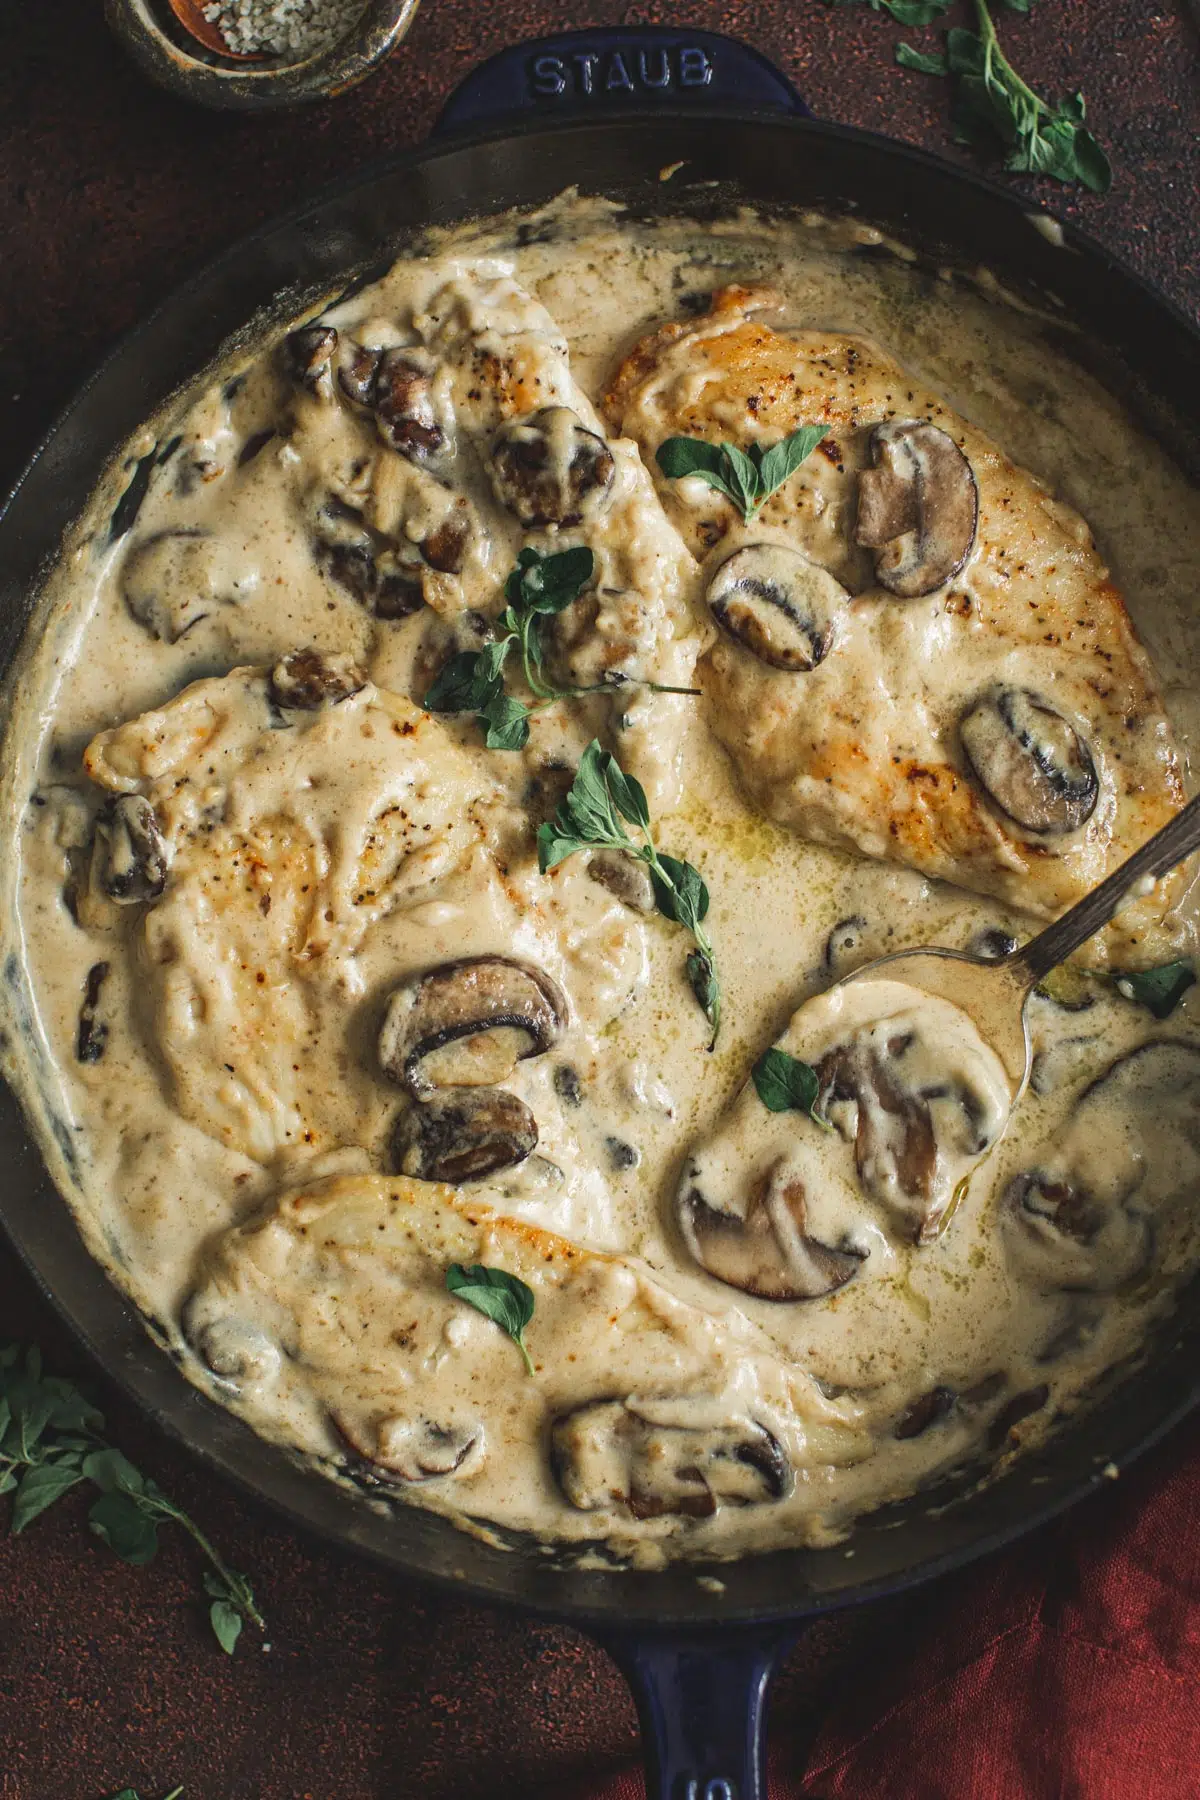 Cream of mushroom chicken topped with fresh oregano in a large skillet.